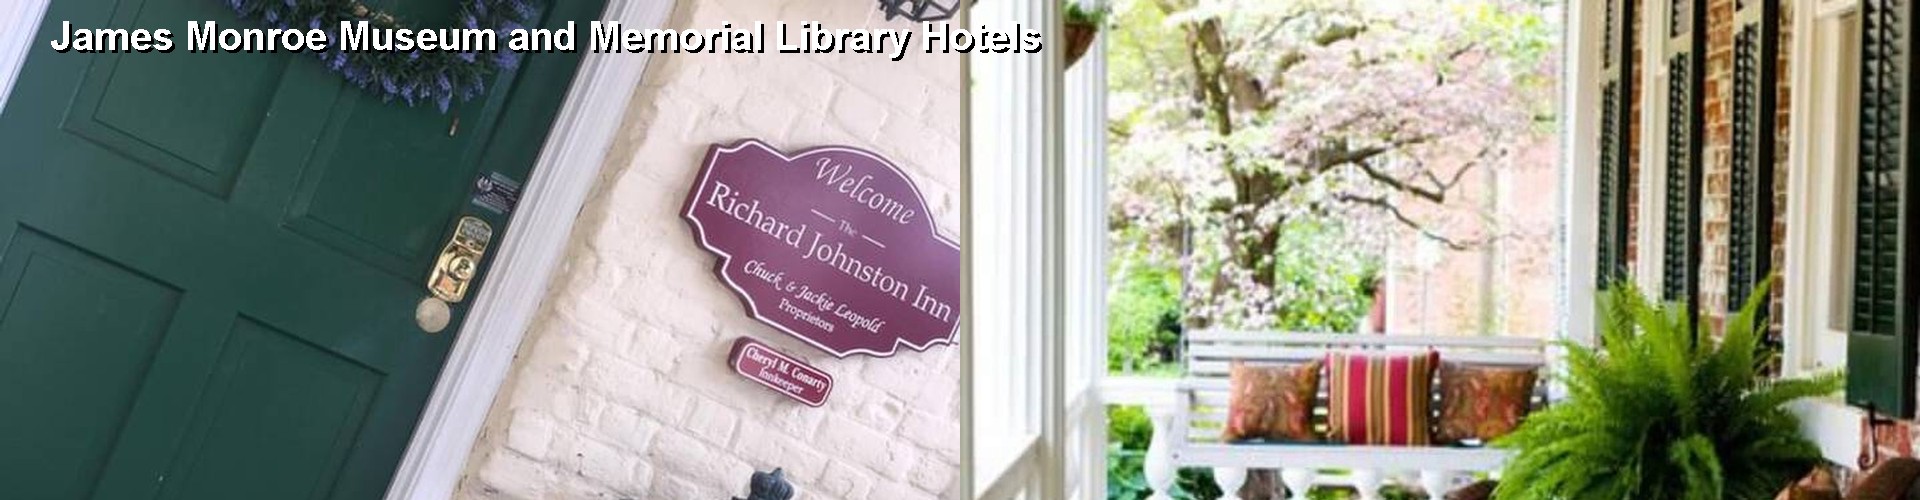 5 Best Hotels near James Monroe Museum and Memorial Library